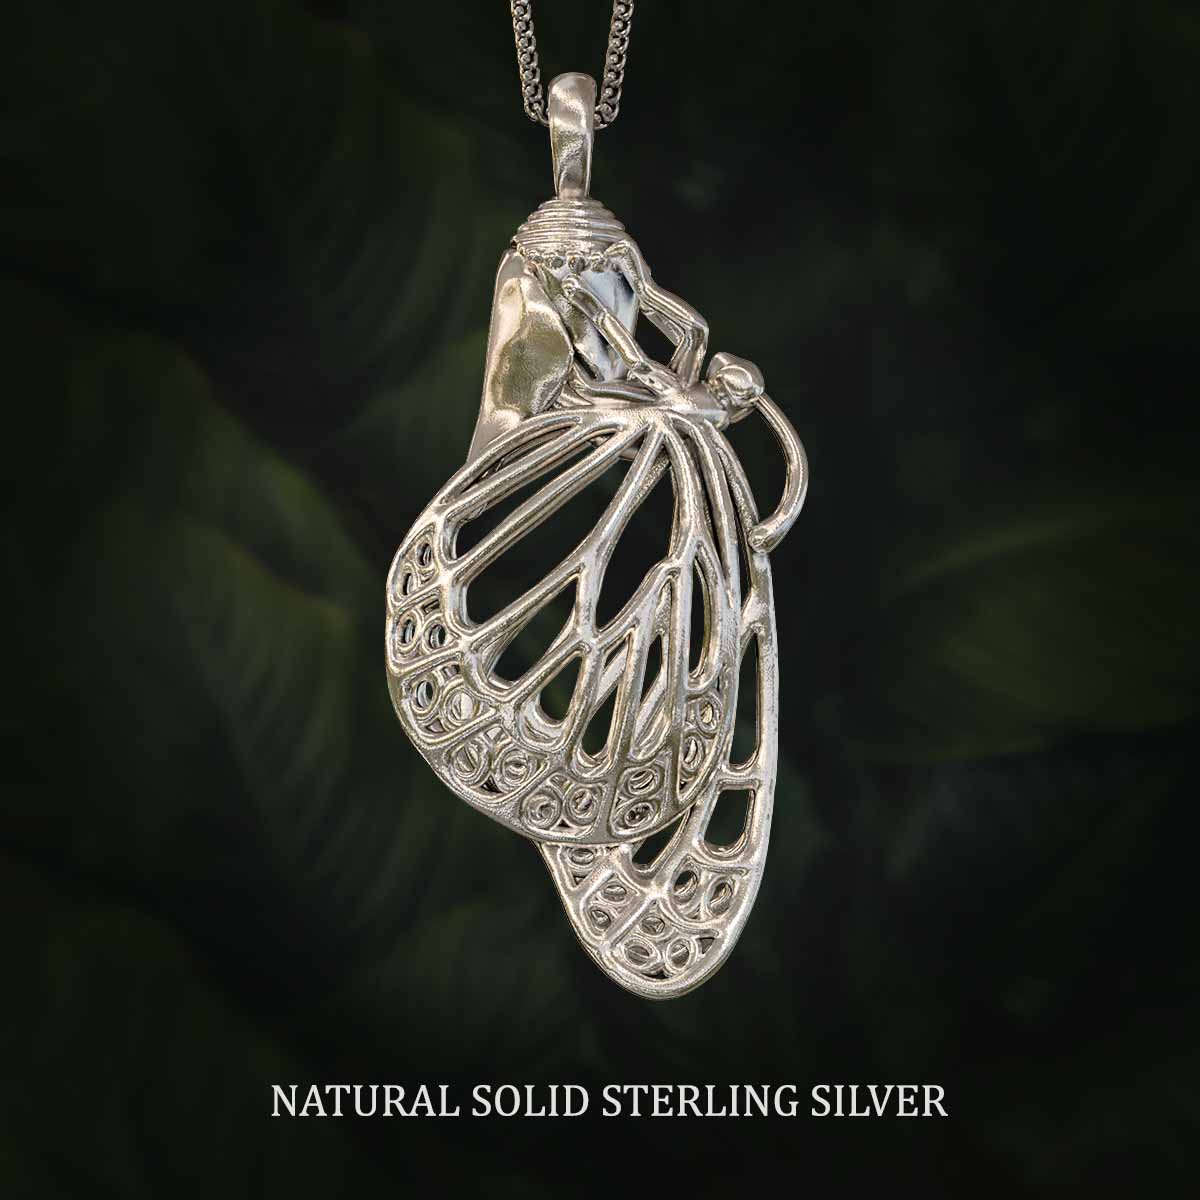 Natural-Satin-Polish-Solid-Sterling-Silver-Monarch-Chrysalis-Pendant-Jewelry-For-Necklace